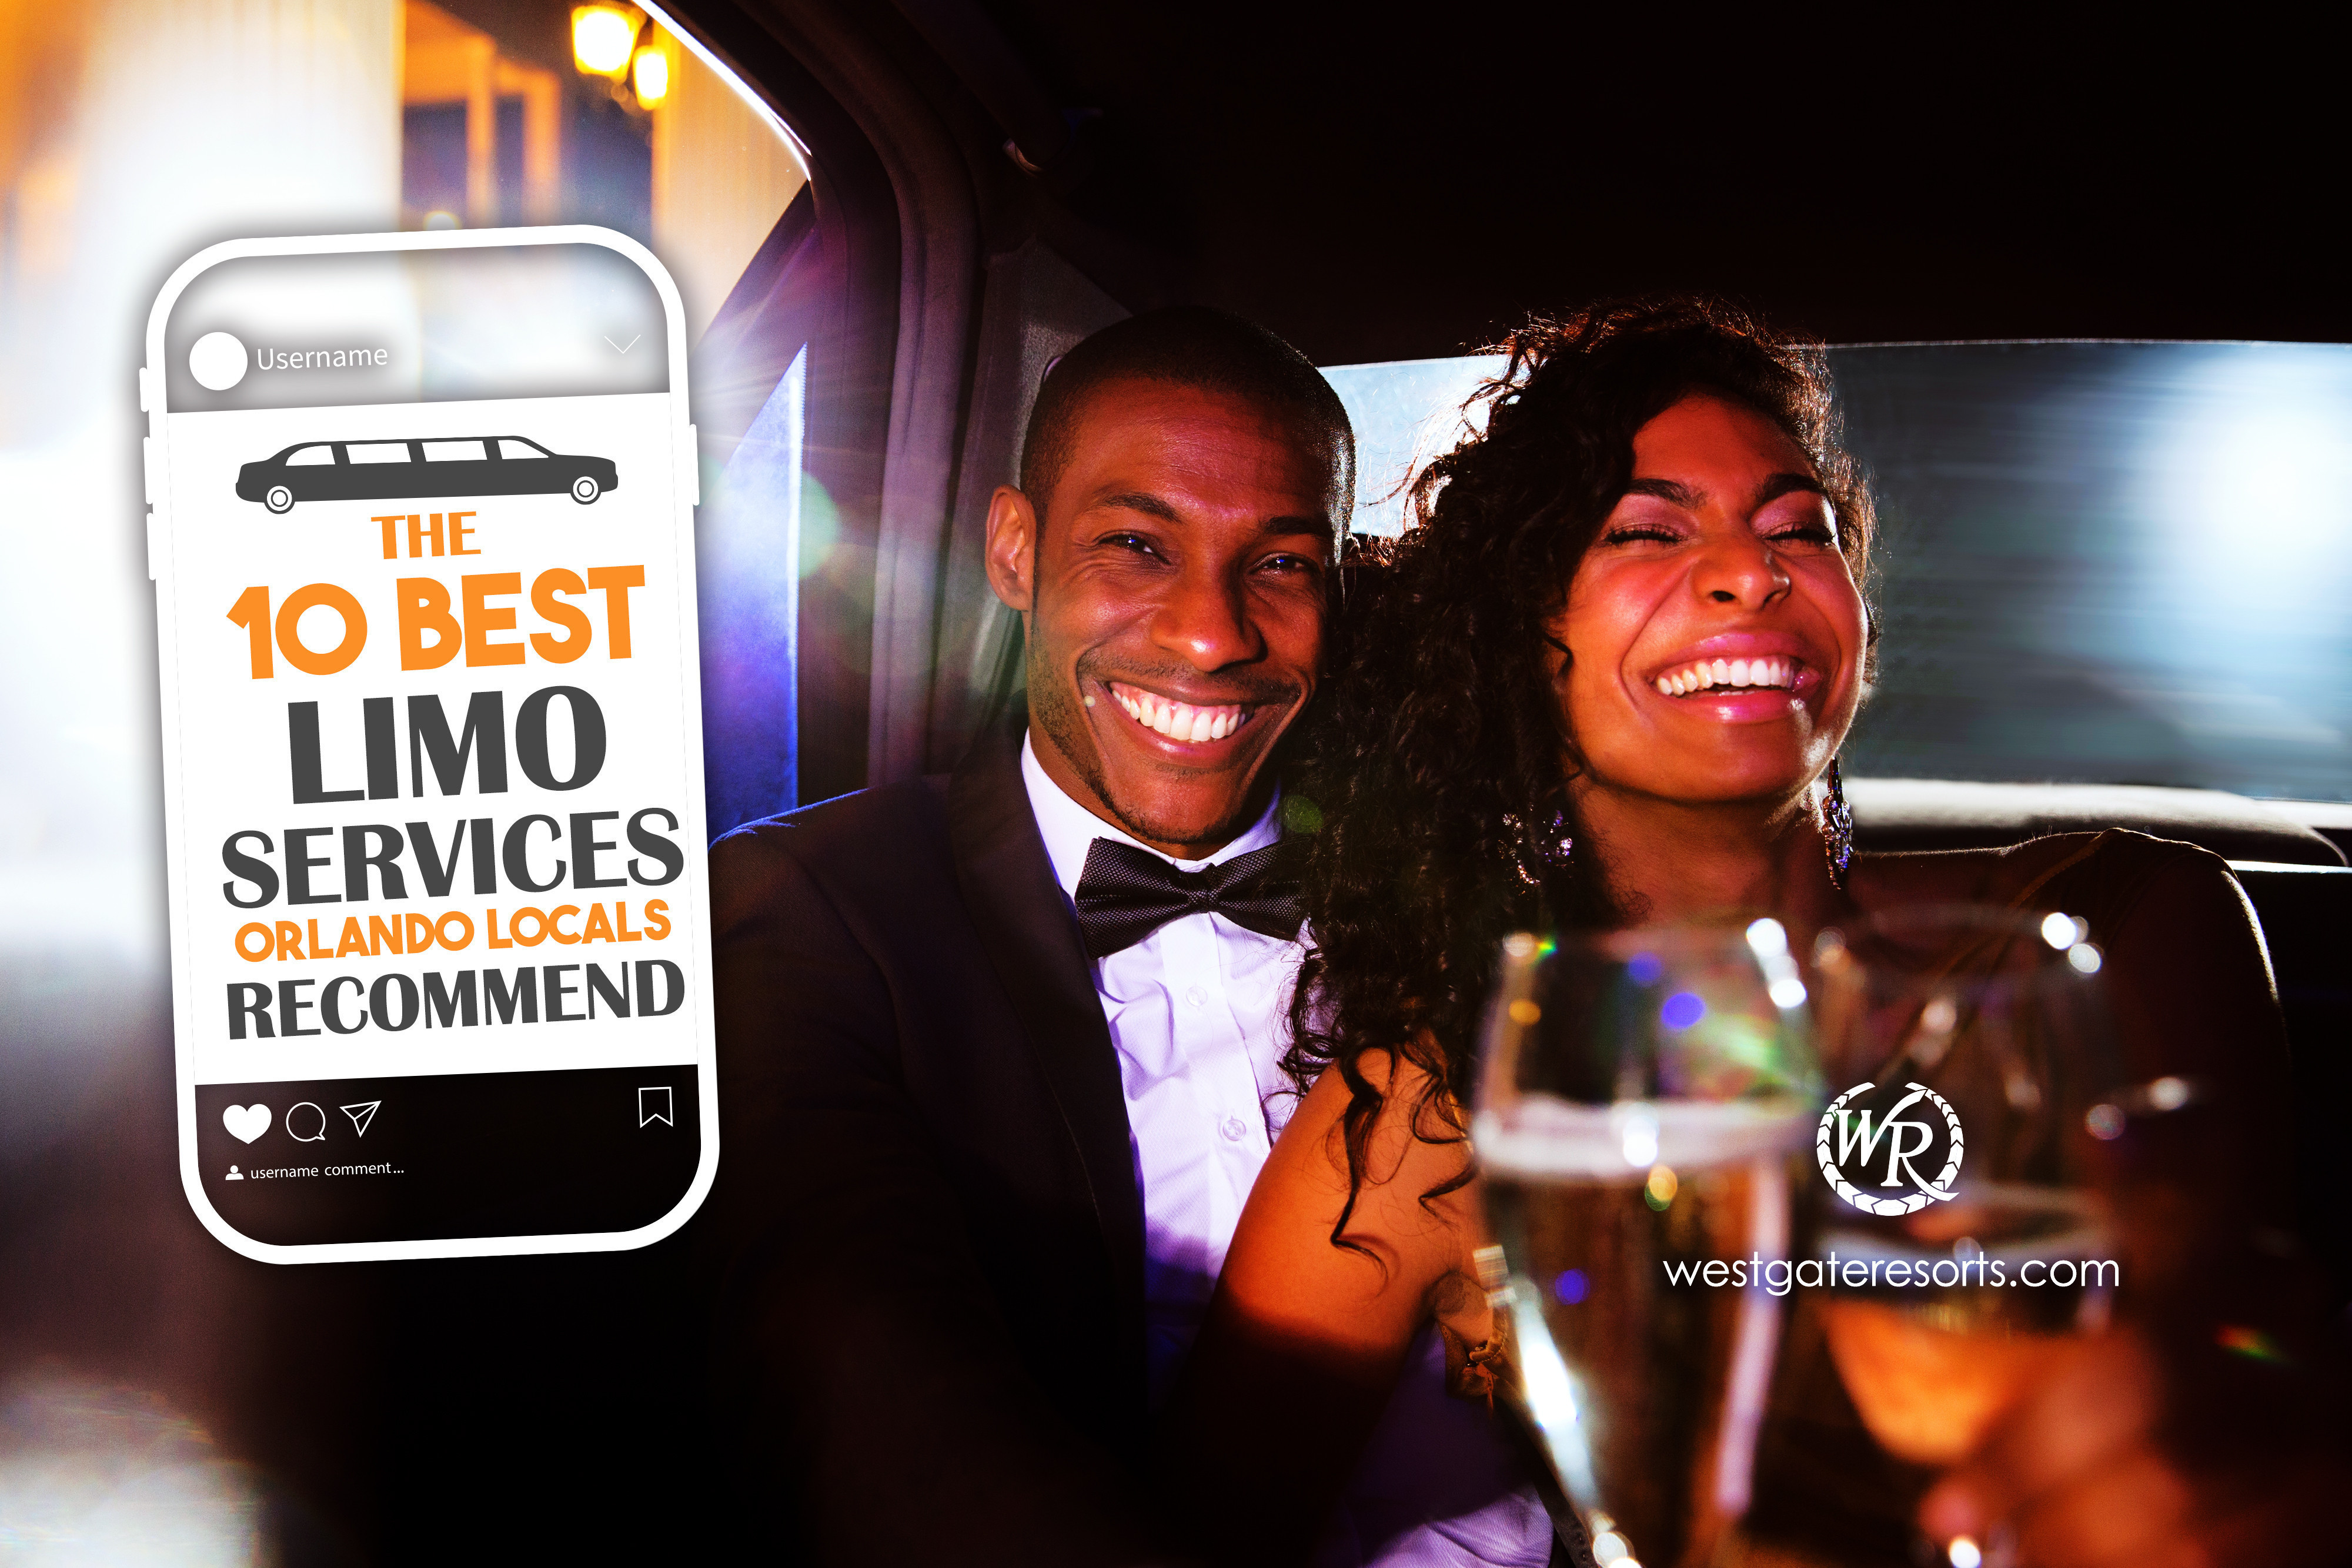 The 10 Best Limo Services Orlando Locals Recommend